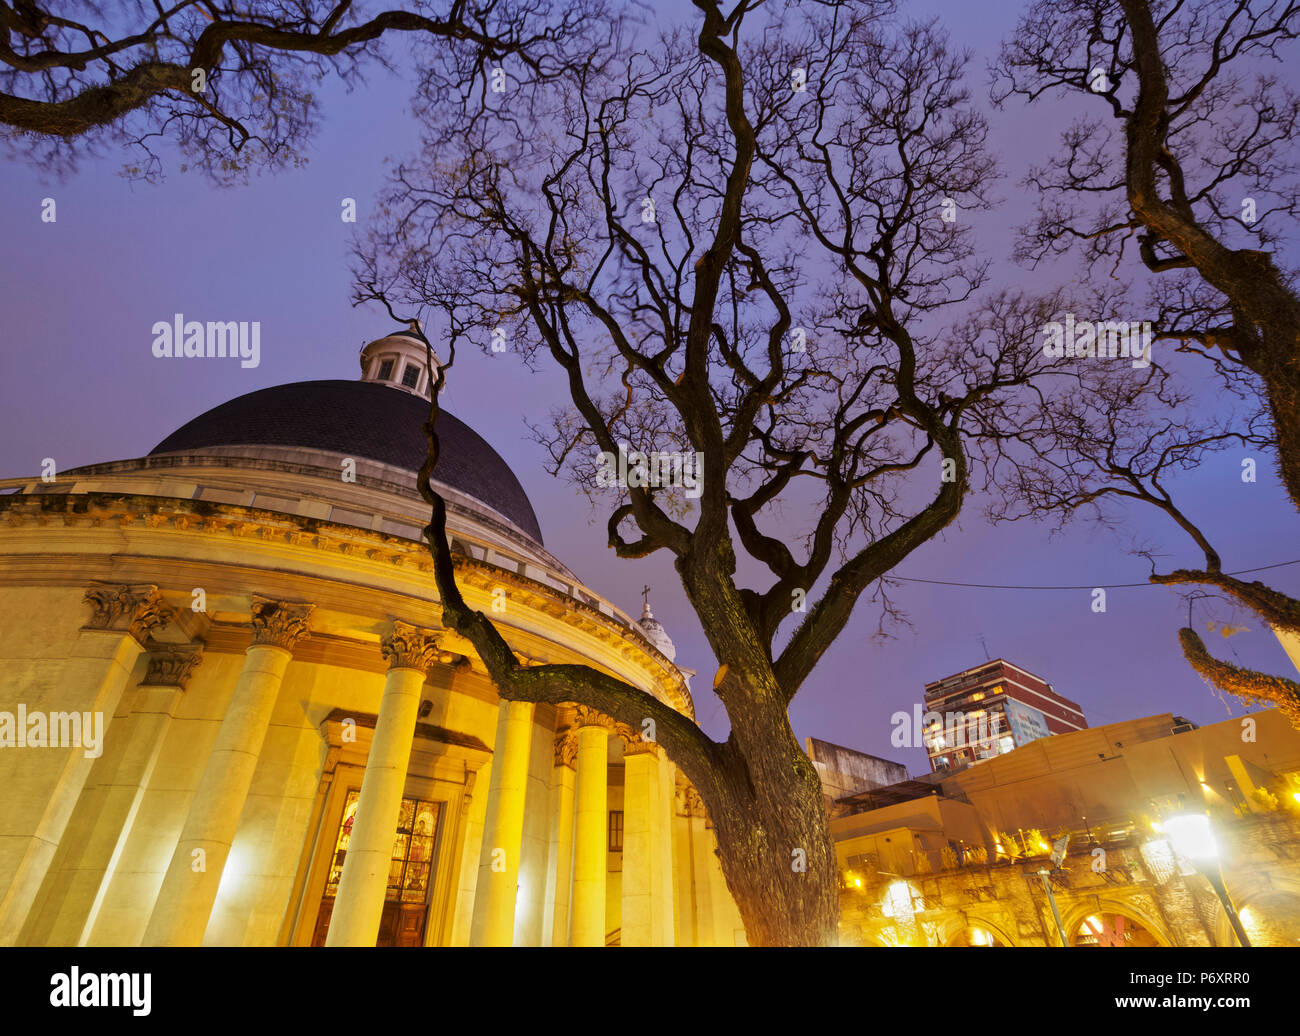 Argentina, Buenos Aires Province, City of Buenos Aires, Belgrano, Twilight view of the Plaza Manuel Belgrano and Inmaculada Concepcion Church known as La Redonda. Stock Photo